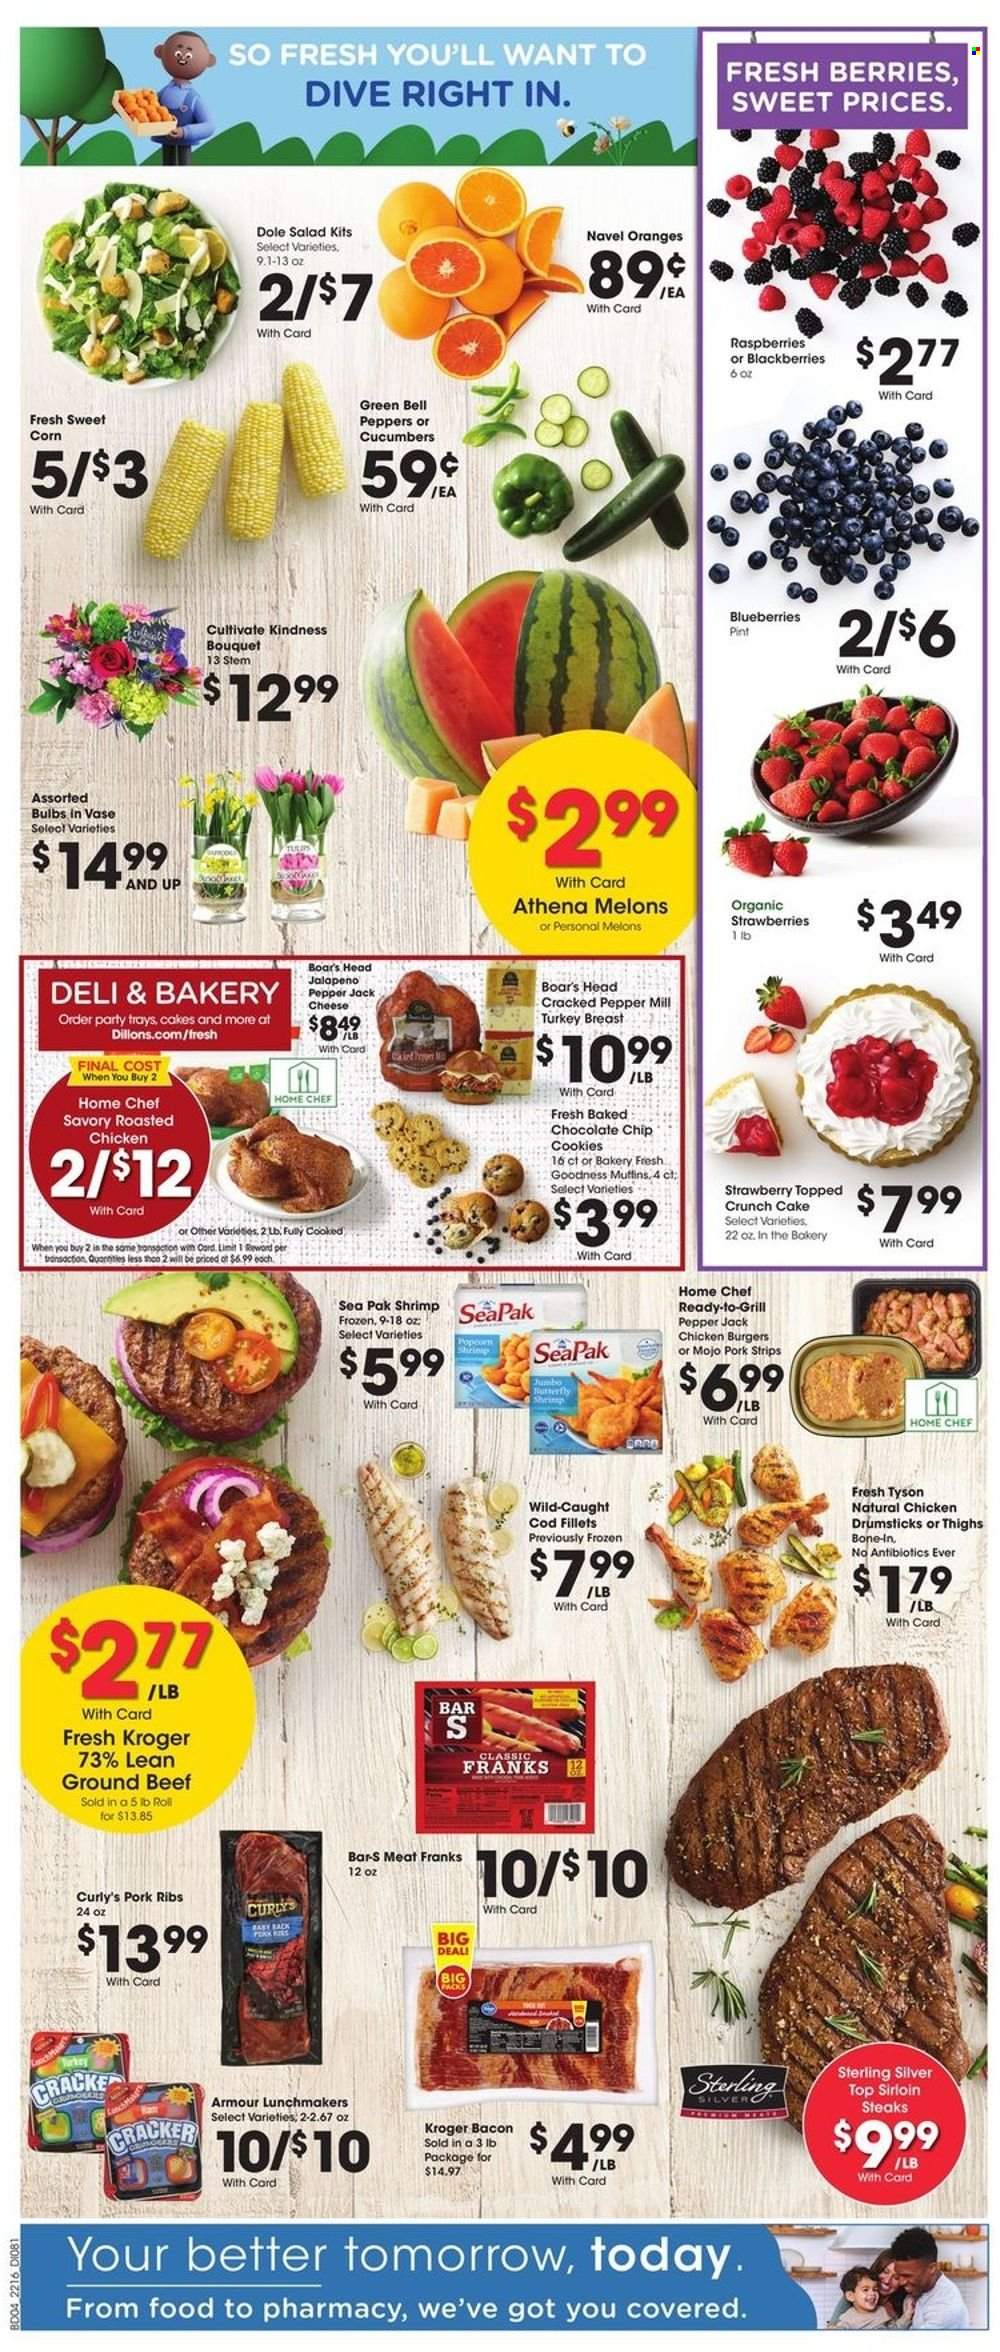 thumbnail - Dillons Flyer - 05/18/2022 - 05/24/2022 - Sales products - cake, corn, cucumber, sweet peppers, salad, Dole, peppers, jalapeño, blackberries, blueberries, strawberries, oranges, cod, shrimps, hamburger, bacon, Pepper Jack cheese, cheese, strips, cookies, crackers, turkey breast, beef meat, ground beef, steak, sirloin steak, pork meat, pork ribs, bouquet, melons, navel oranges. Page 8.